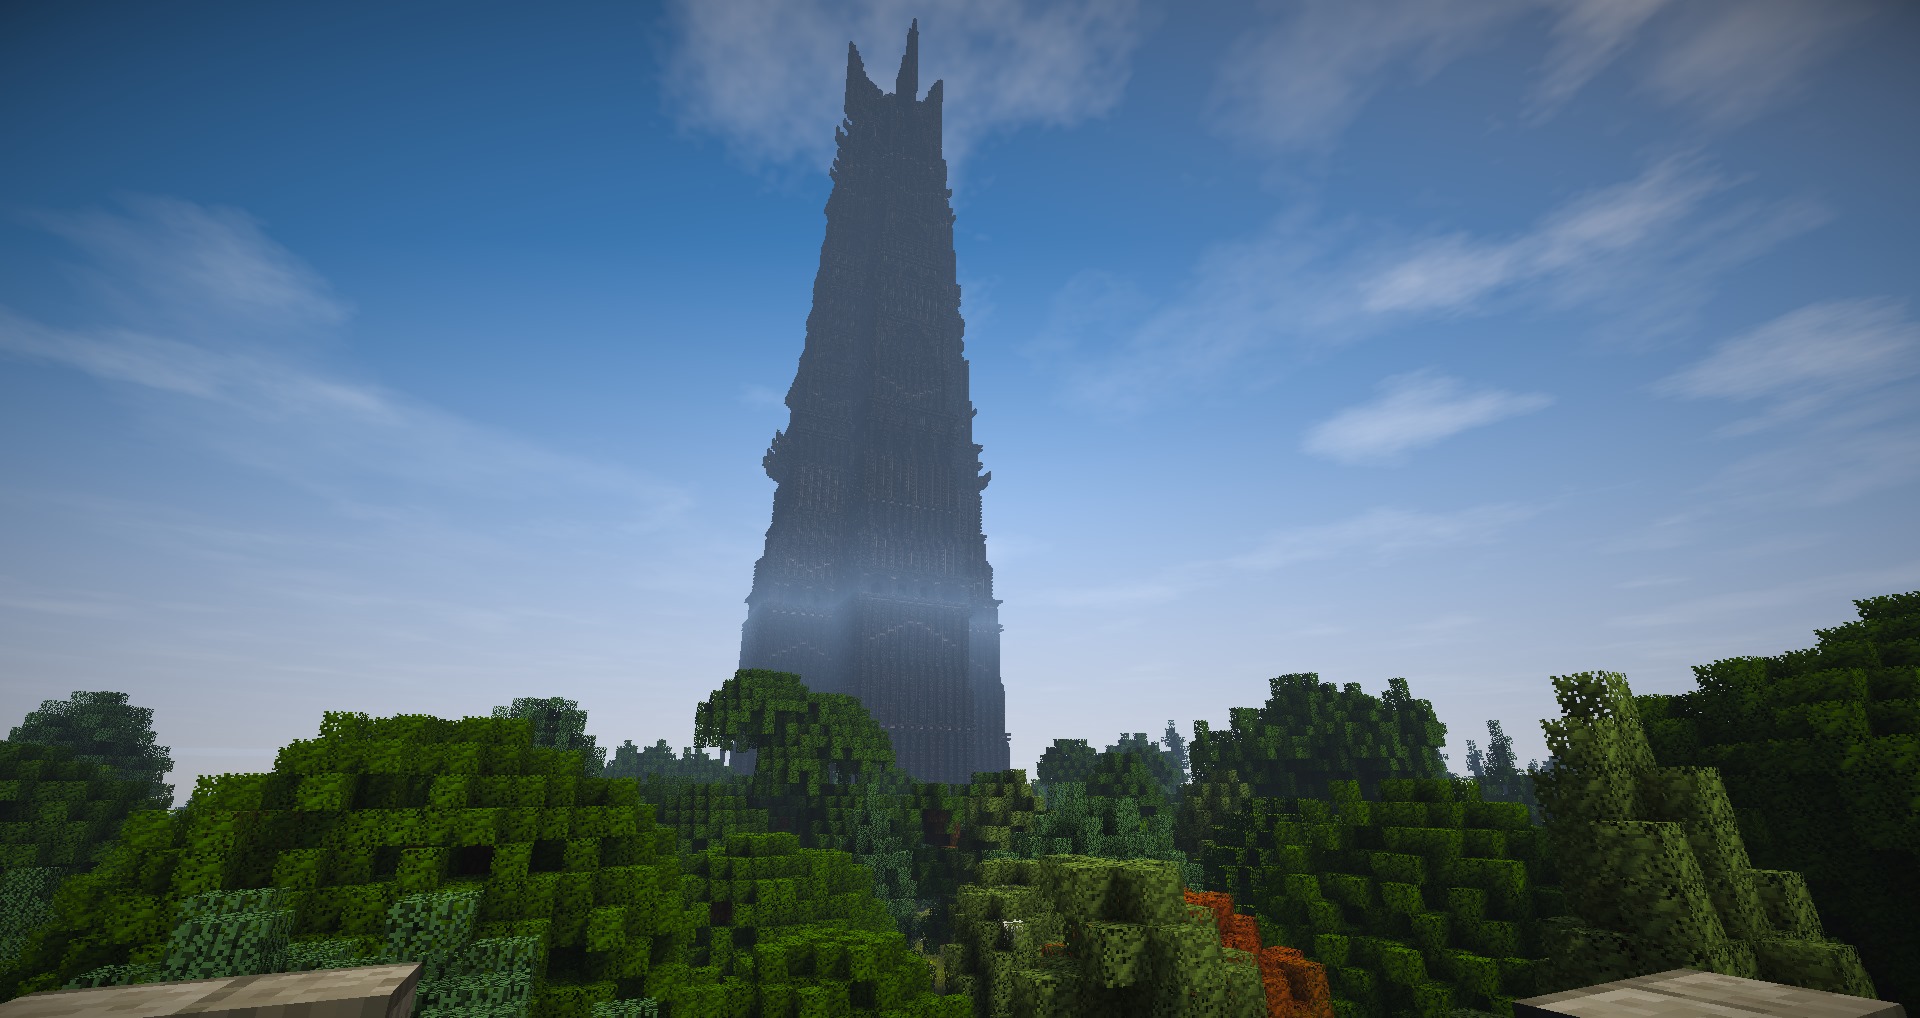 Minecraft Middle-Earth Project Celebrating 10-Year Anniversary